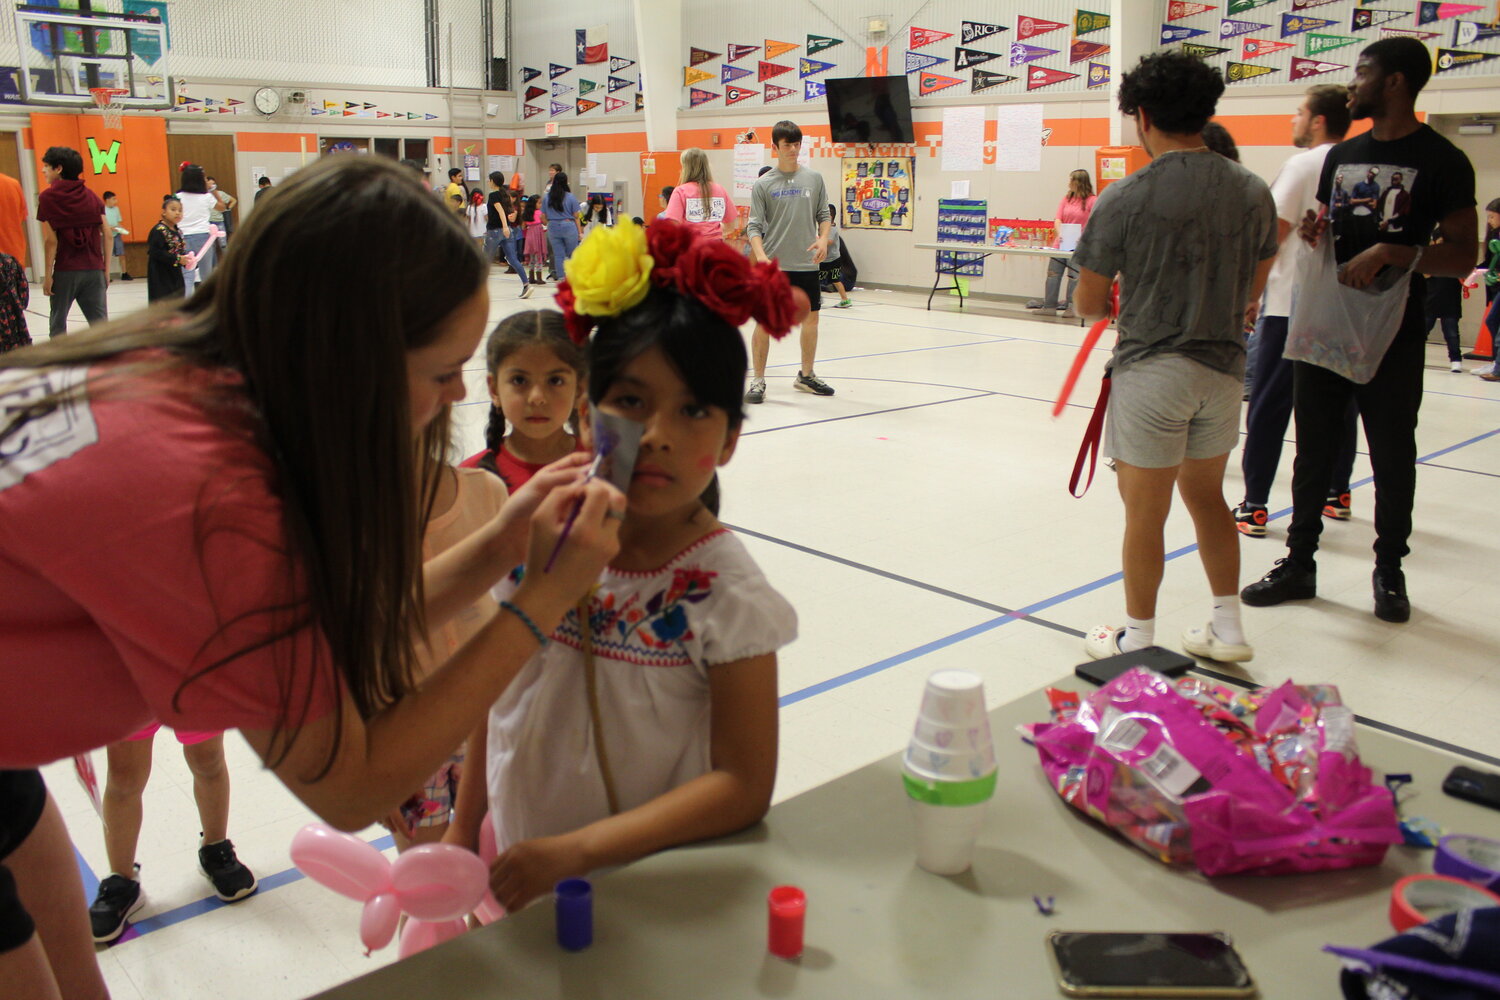 Face painting was among the activities for the Mineola ISD Cinco de Mayo event.